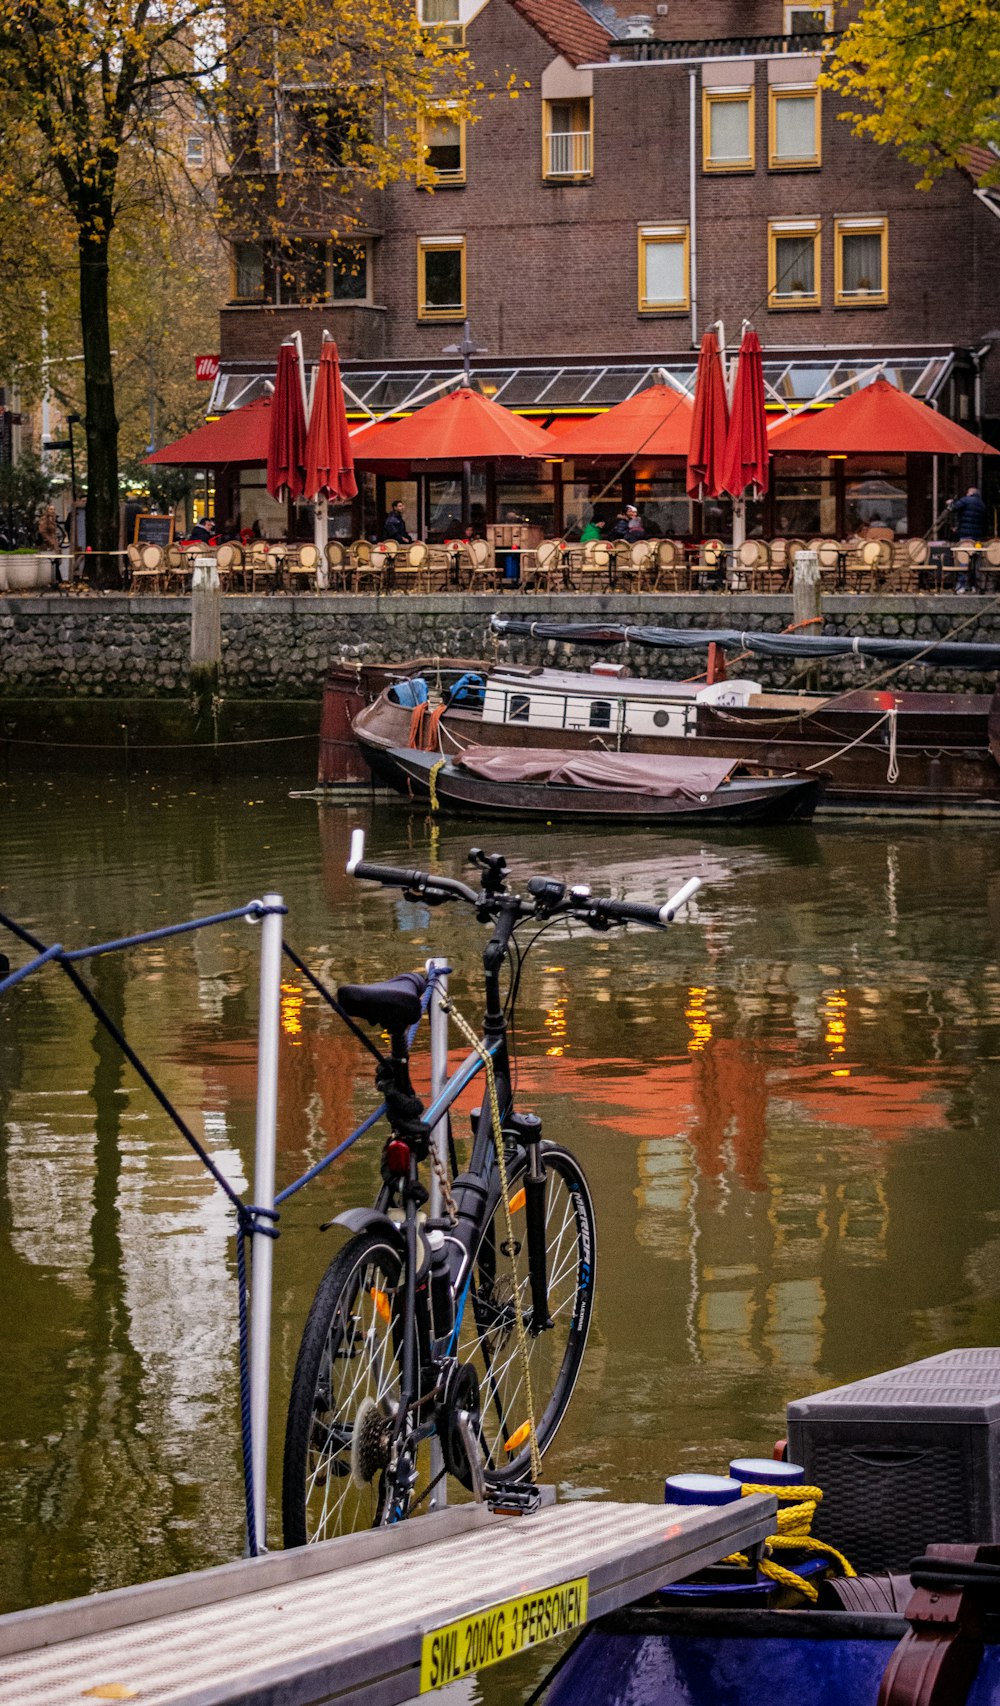 boat on body of water and bike bike parking near post and people in restaurant during daytime